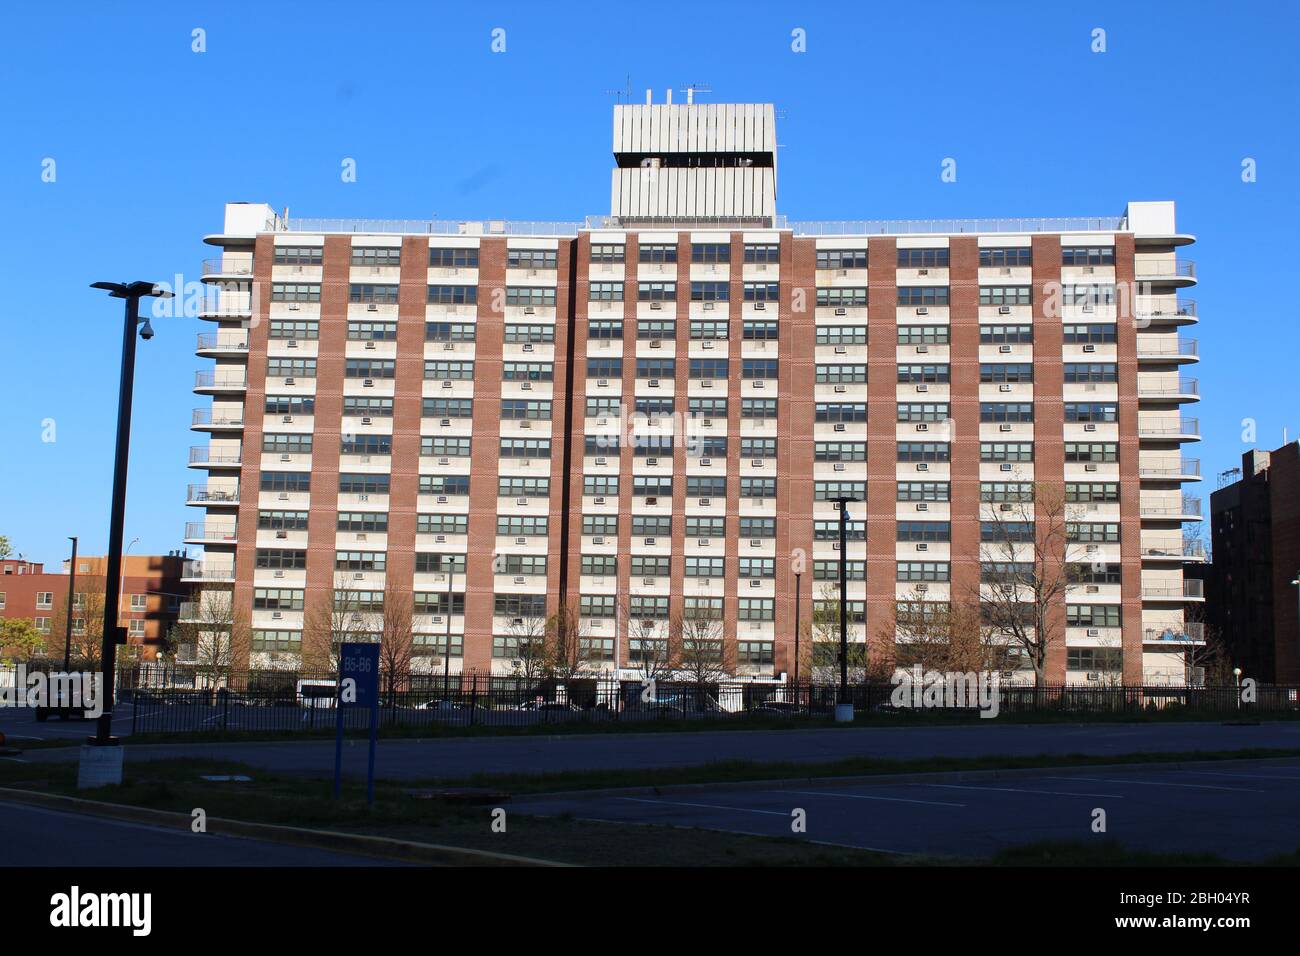 New York, New York, USA. 22nd Apr, 2020. This huge medicalized retirement home called Kittay Senior Apartments with 295 independent housing spread over 12 floors has also been stormed by Coronavirus in Bronx, New York City. 3425 residents of New York state nursing homes including 554 in Bronx so far have died because of COVID-19. That represents nearly 25% of the state's pandemic deaths. Credit: Marie Le Ble/ZUMA Wire/Alamy Live News Stock Photo